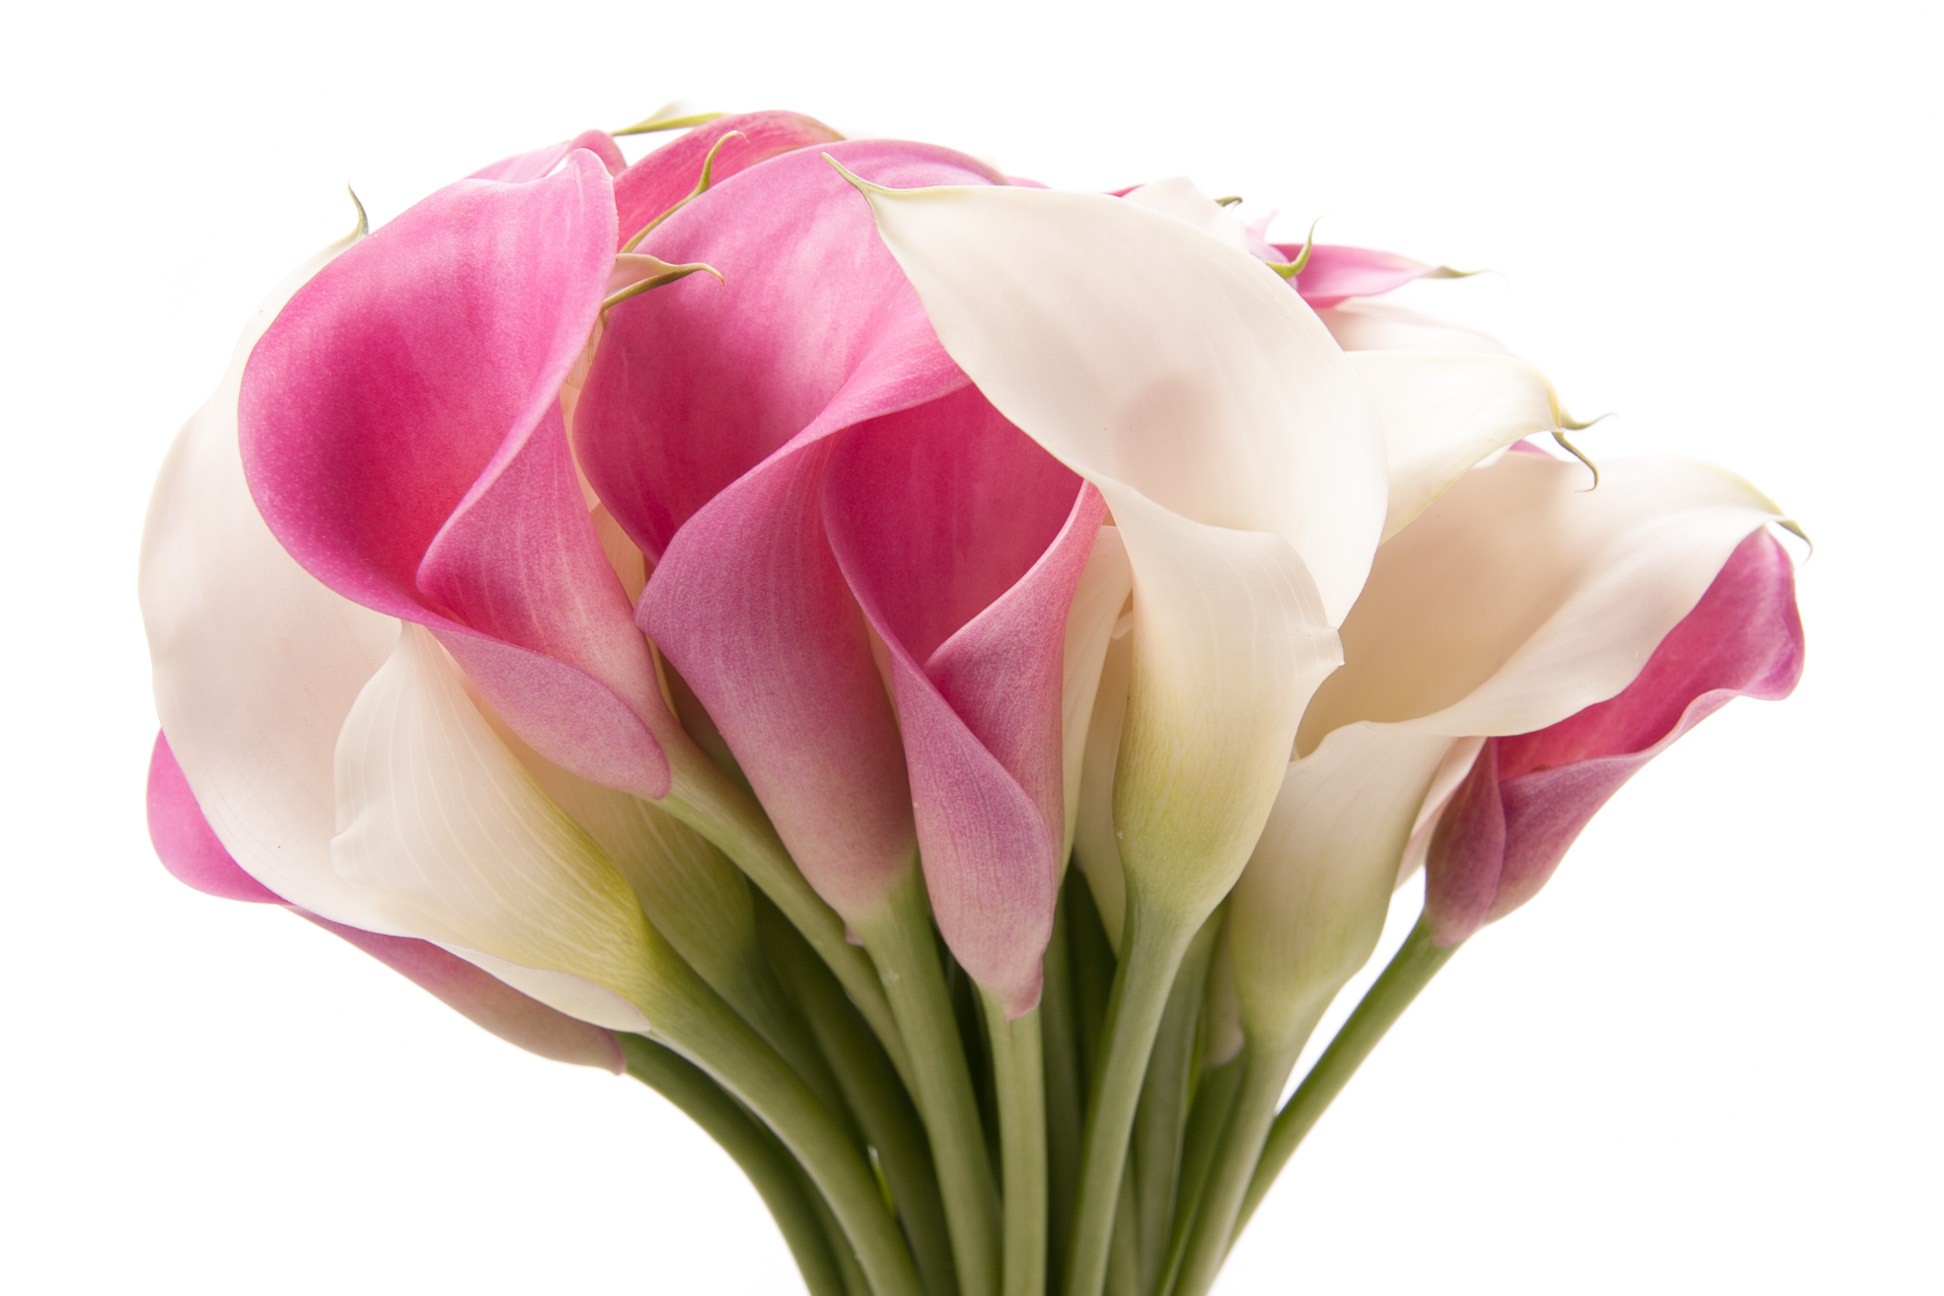 Pink And White Calla Lily Bouquet Flowers Image Picture Wallpaper